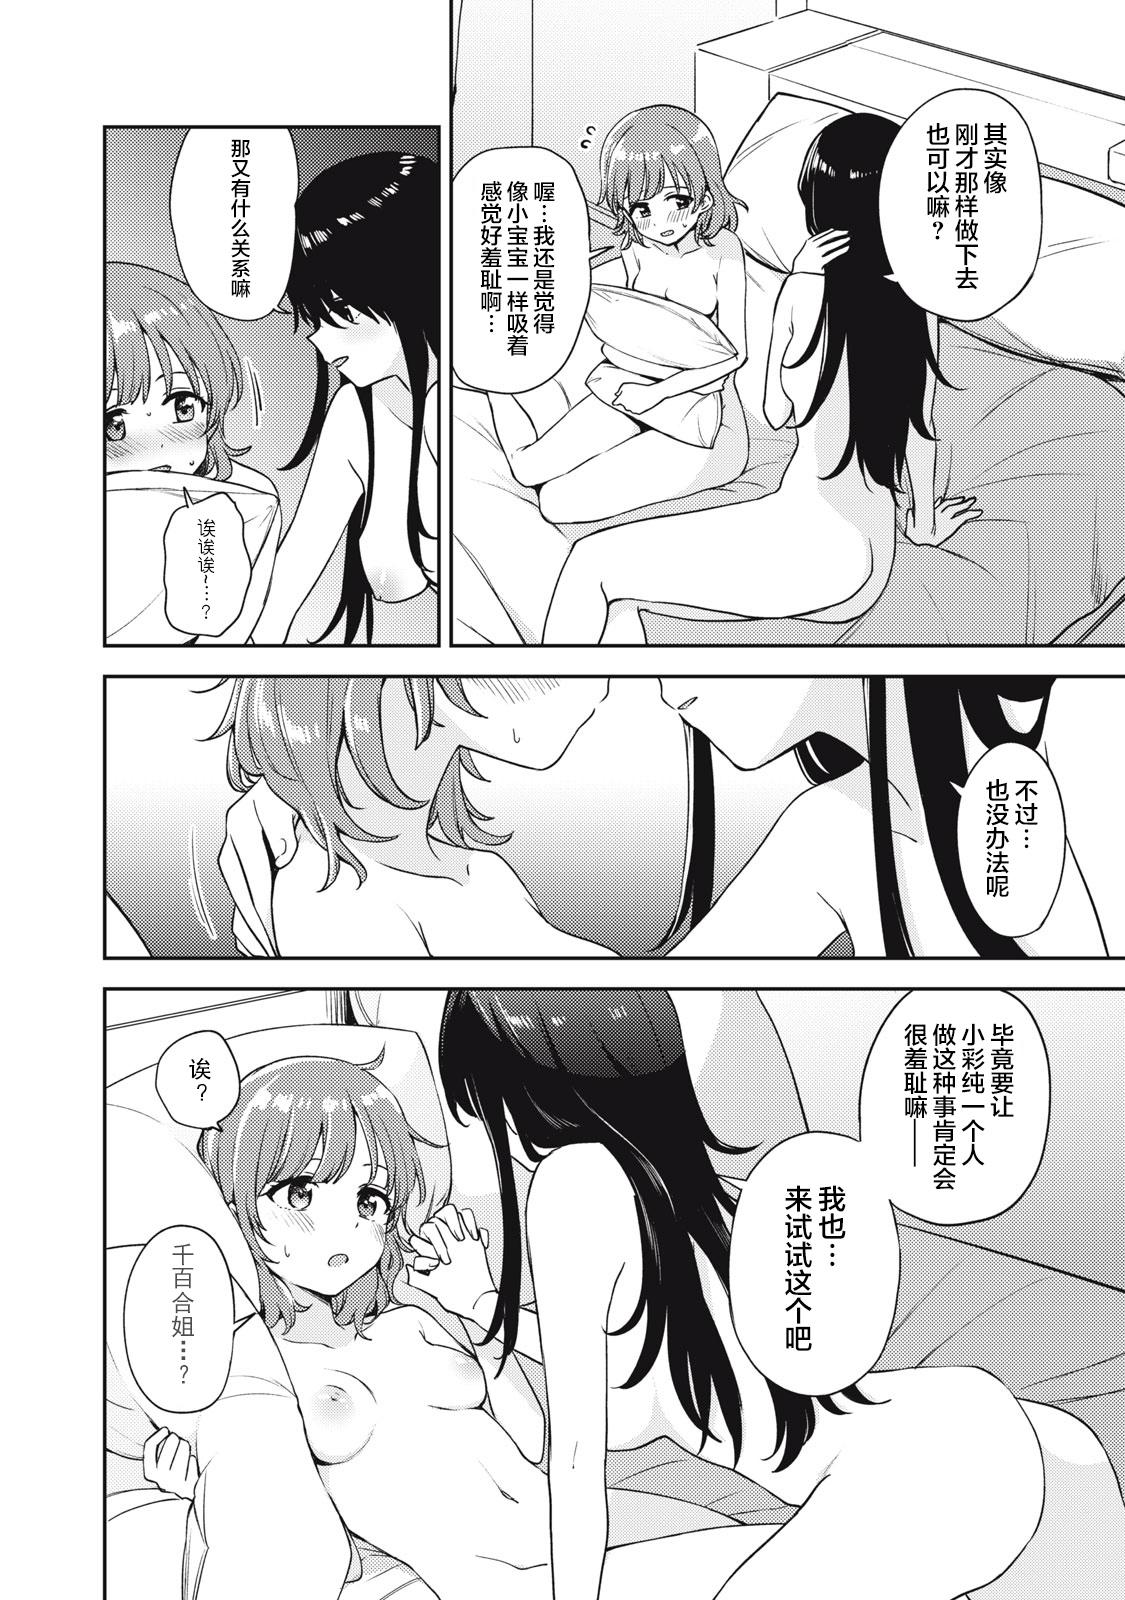 Anal Sex Asumi-chan Is Interested In Lesbian Brothels! Extra Episode Naturaltits - Page 8